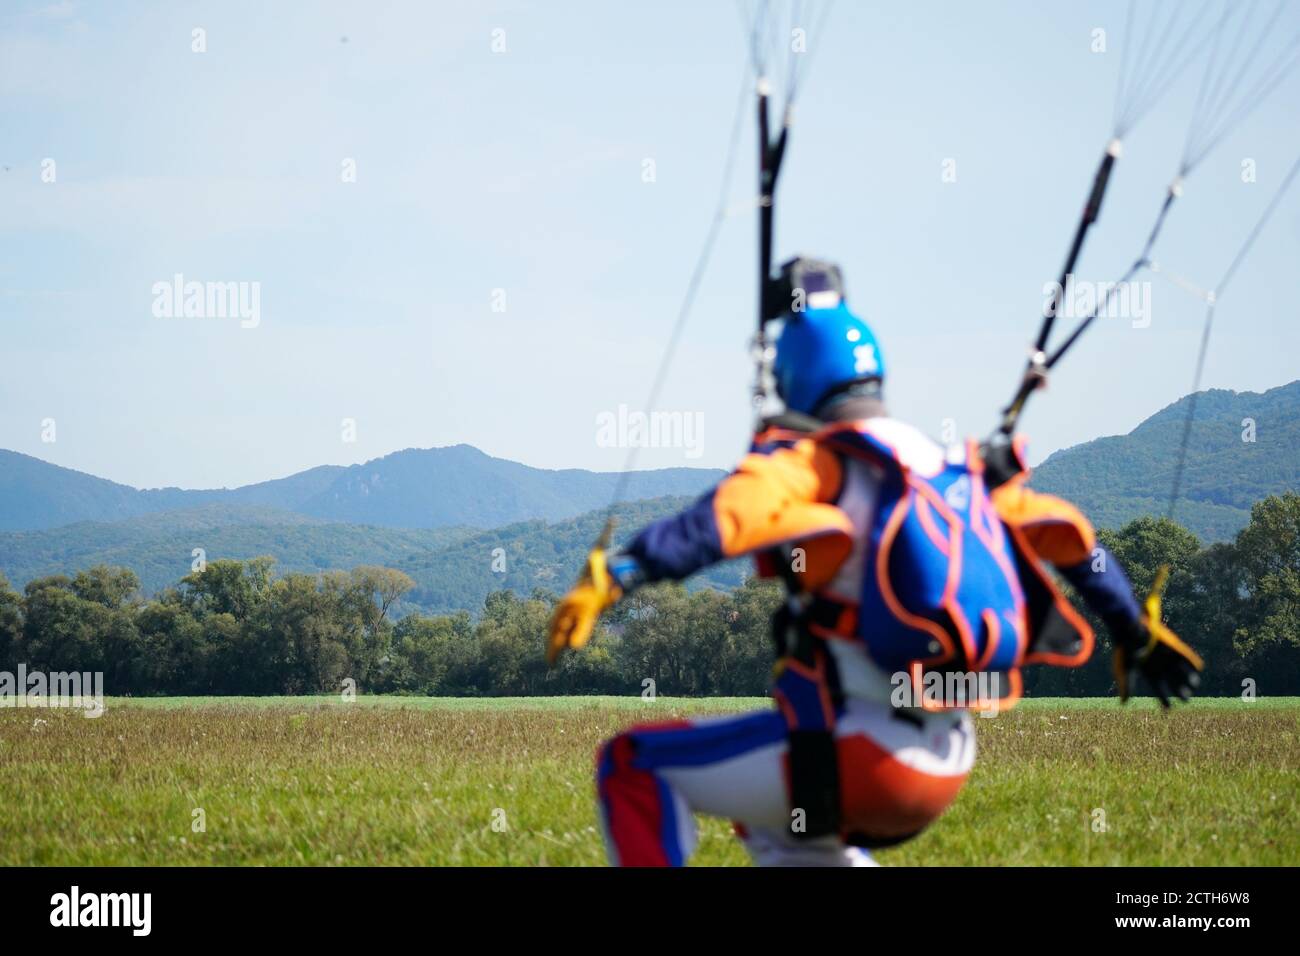 Single parachutist jumped from an air-plane uses a parachute to land. Simple concept with copy space photograph. Stock Photo